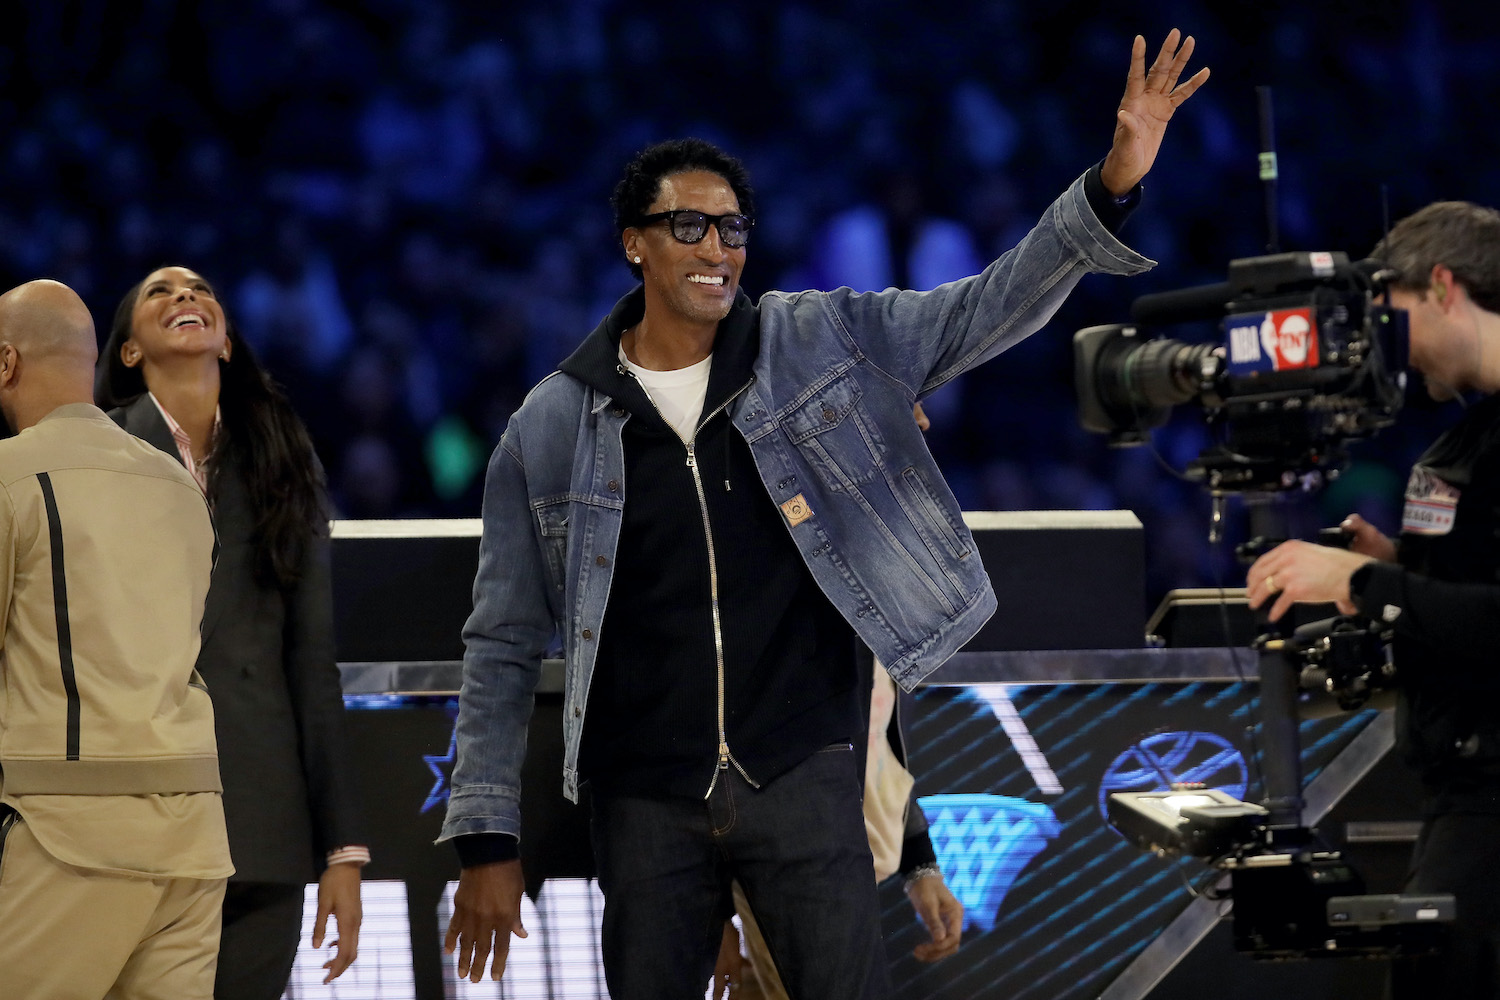 Scottie Pippen acknowledges the crowd during the NBA's 2020 All-Star Weekend.